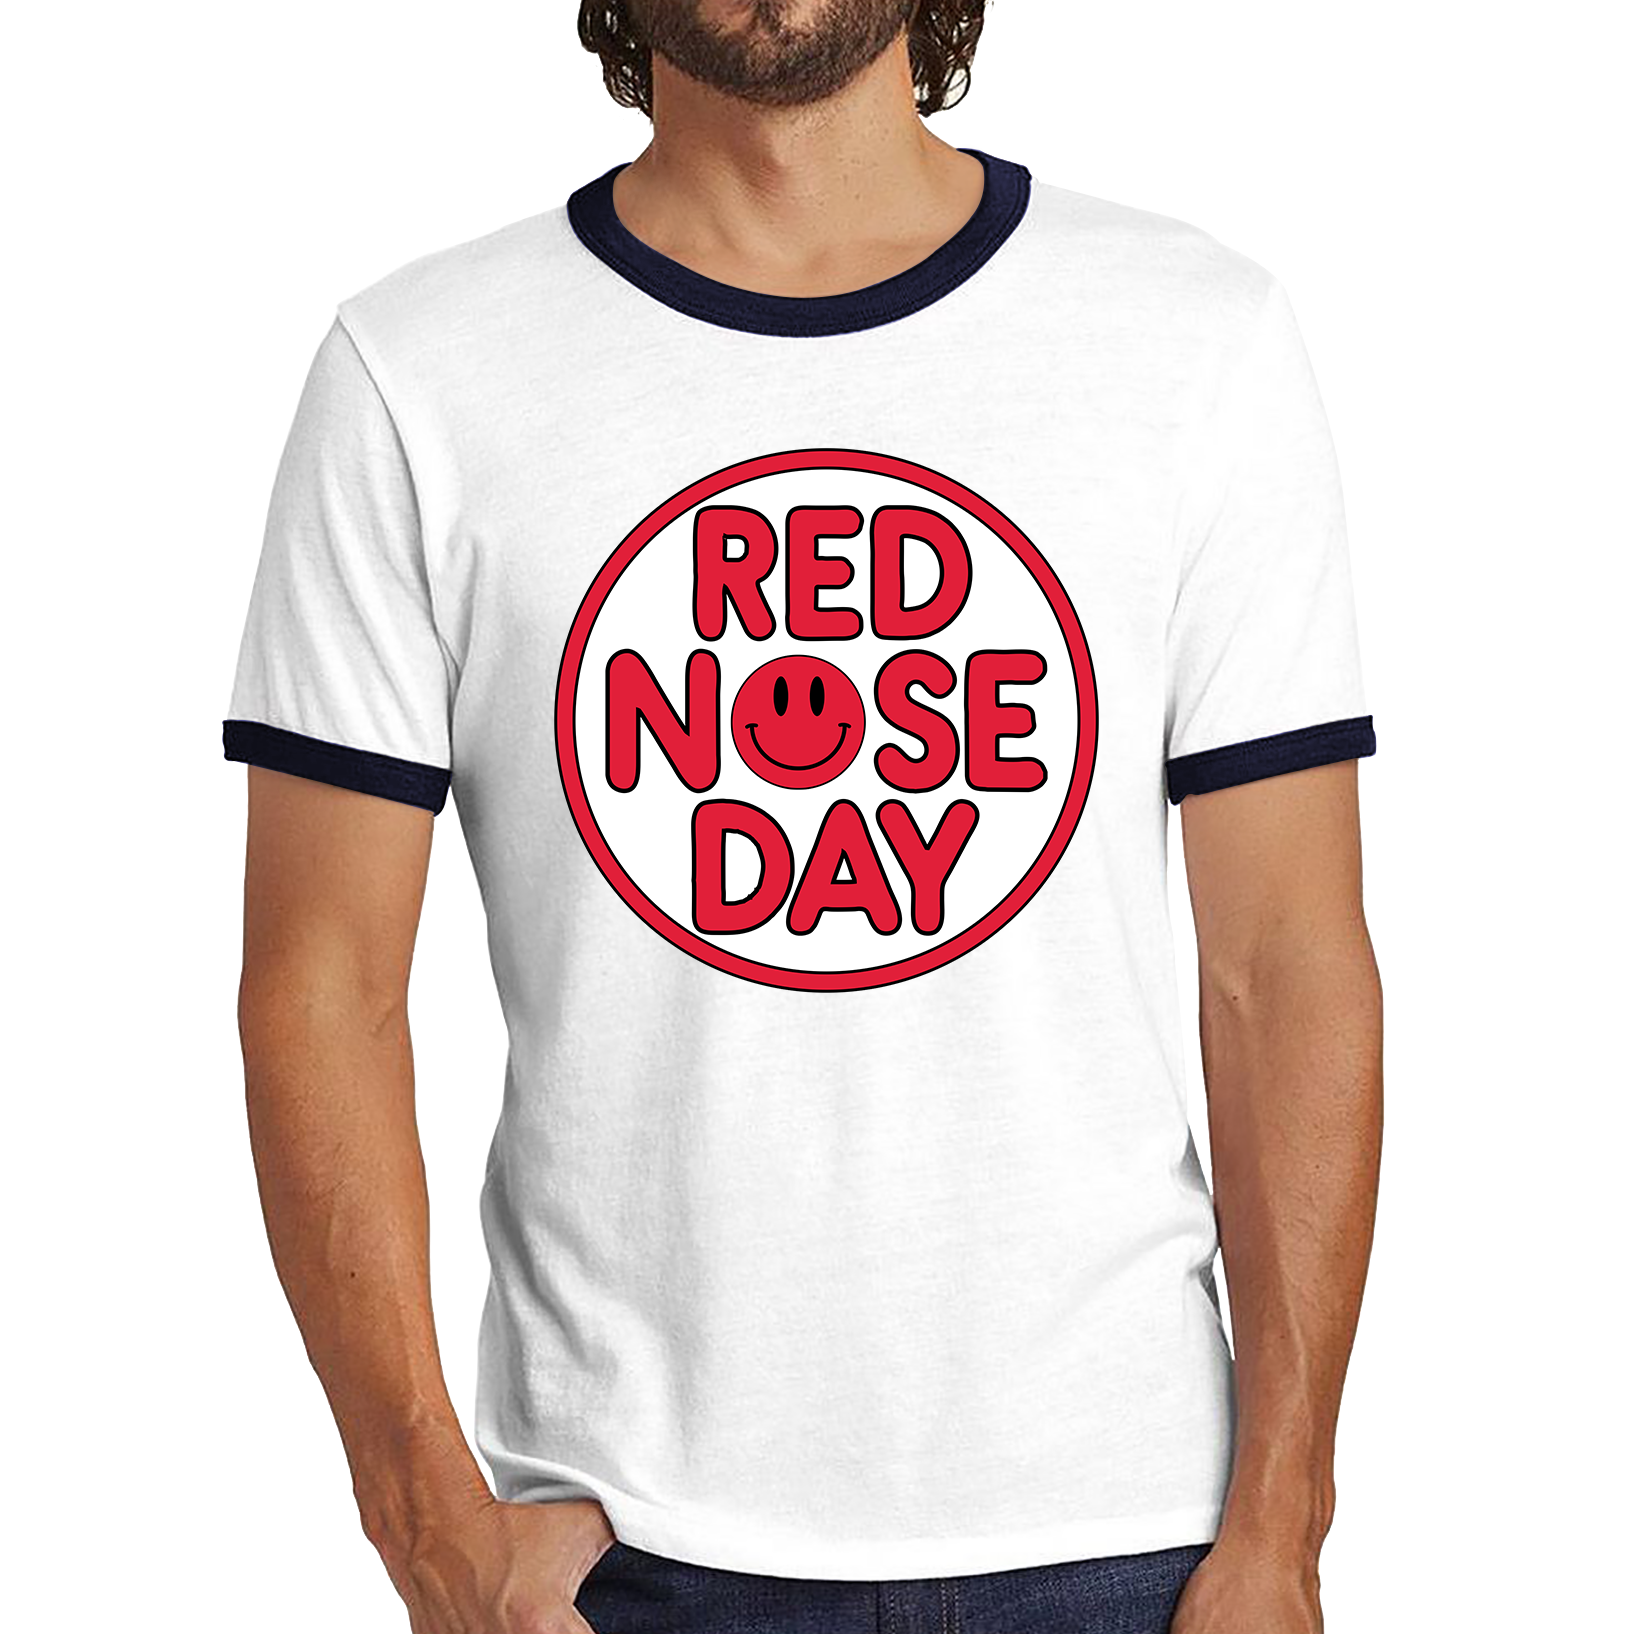 Smiley Face Red Nose Day Ringer T Shirt. 50% Goes To Charity